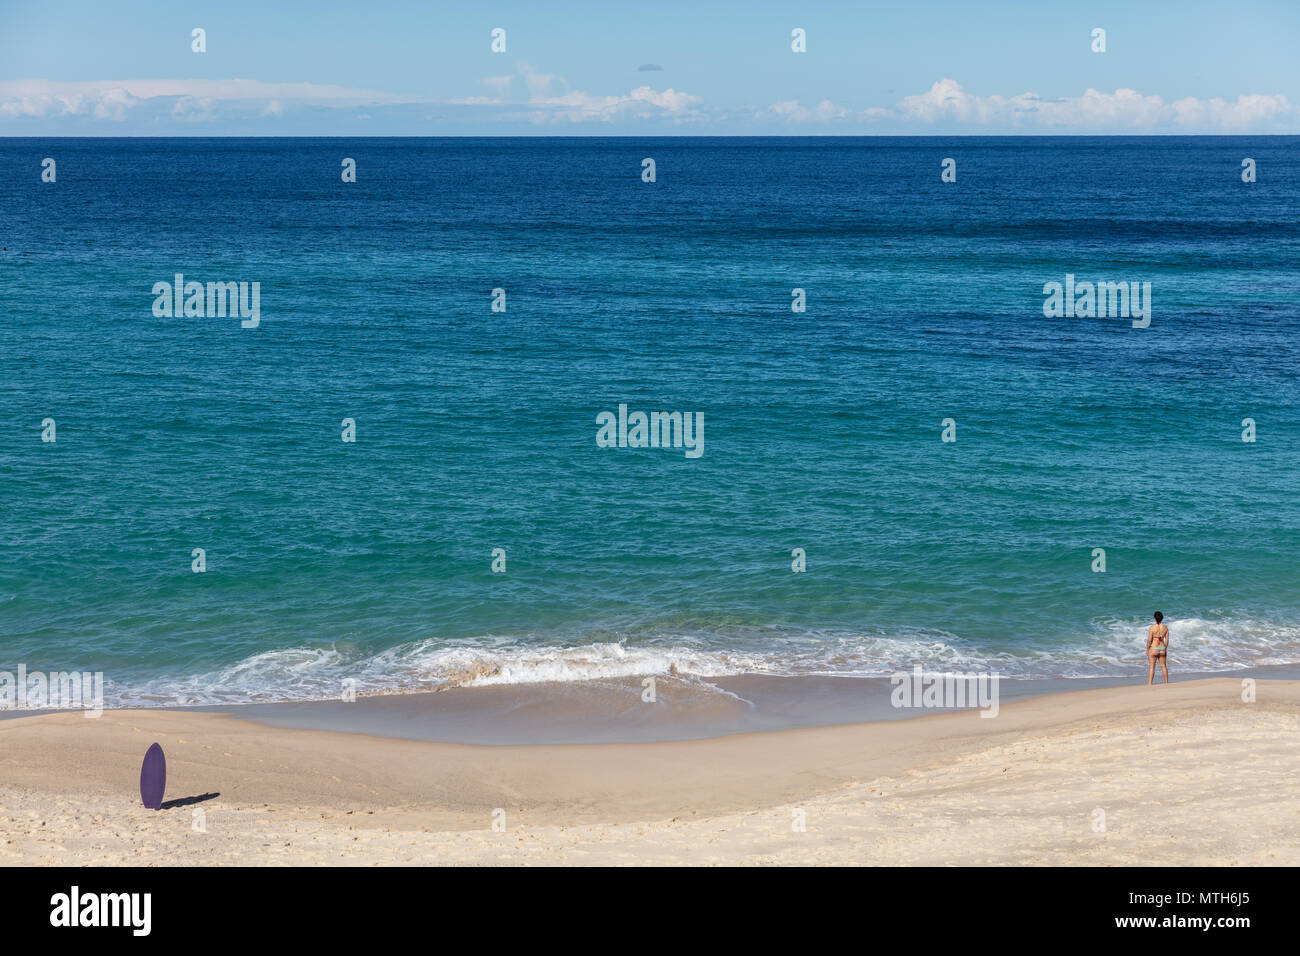 Surfboard and swimmer at Bronte Beach in Sydney, NSW, Australia Stock Photo